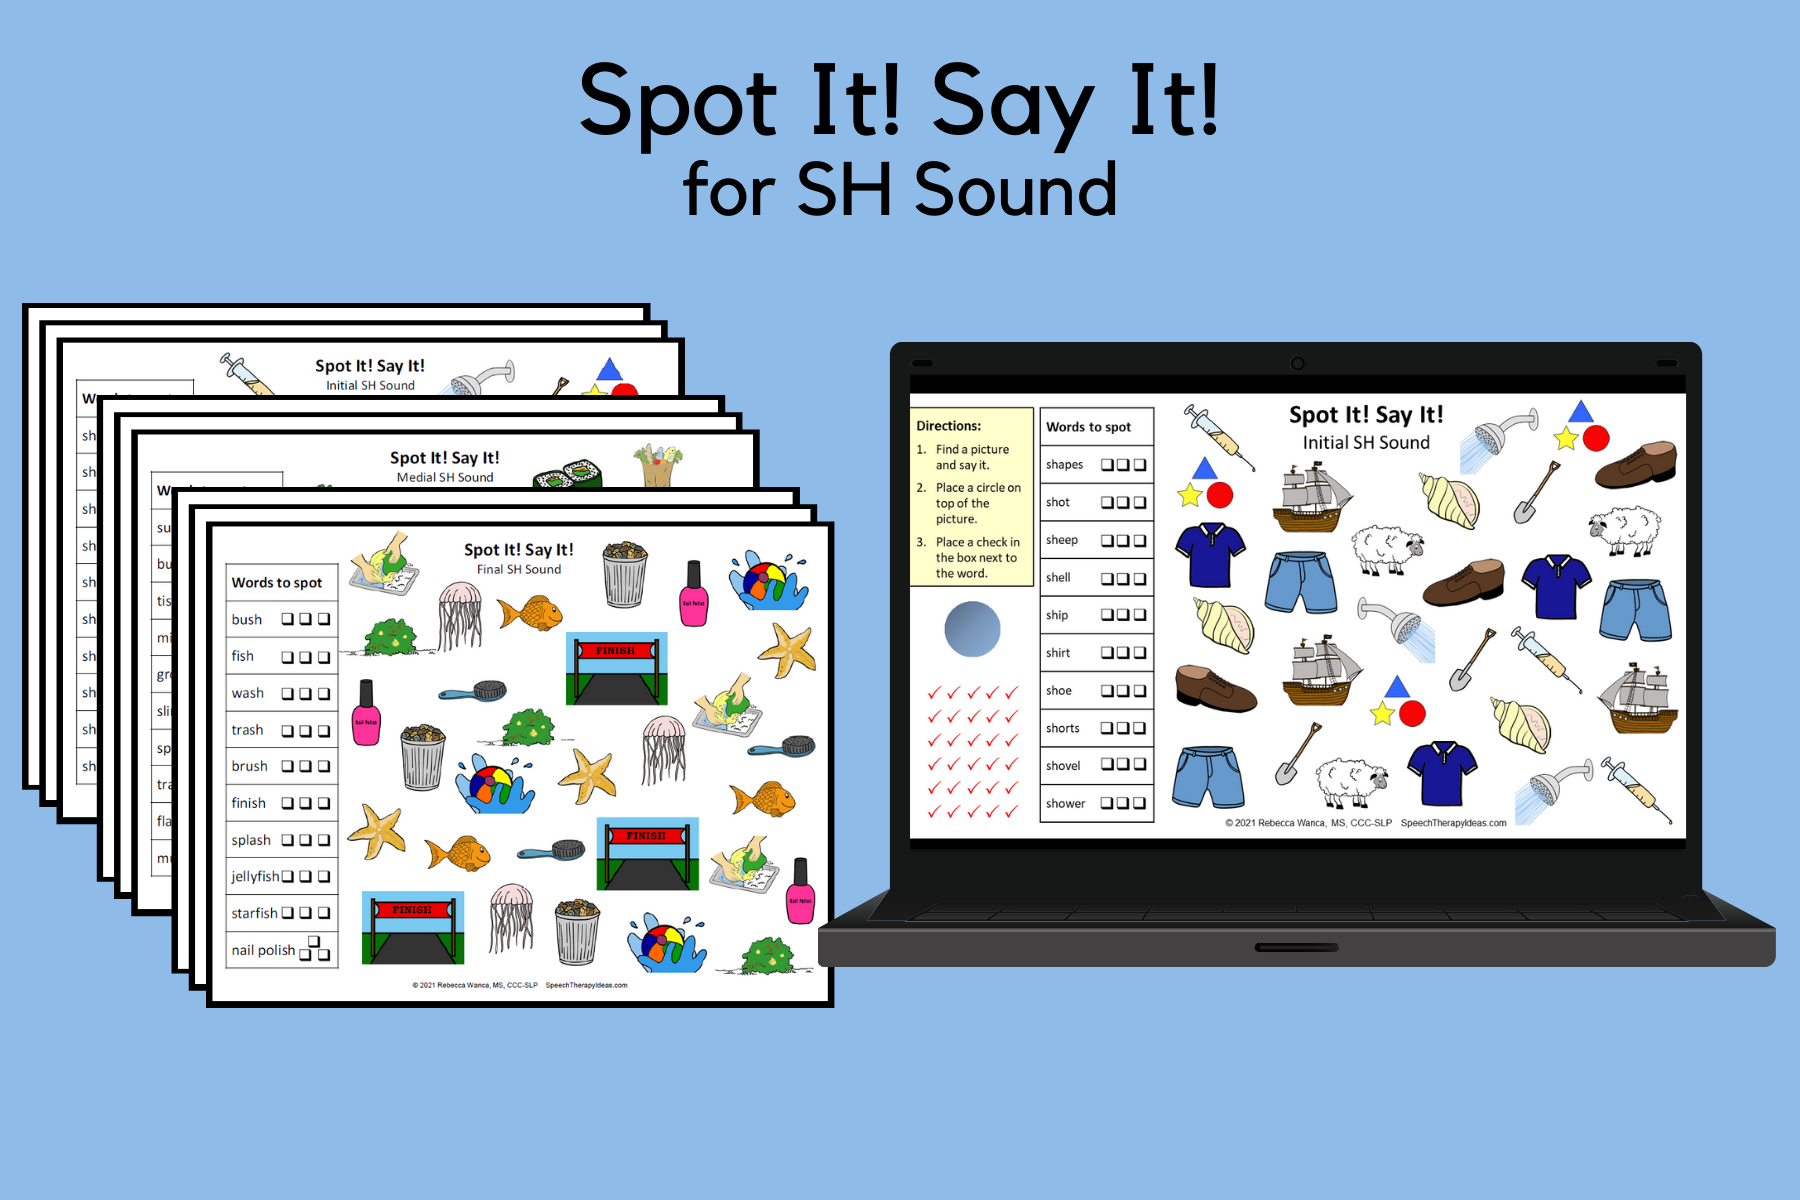 Spot It! Say It! Pages for SH Sound